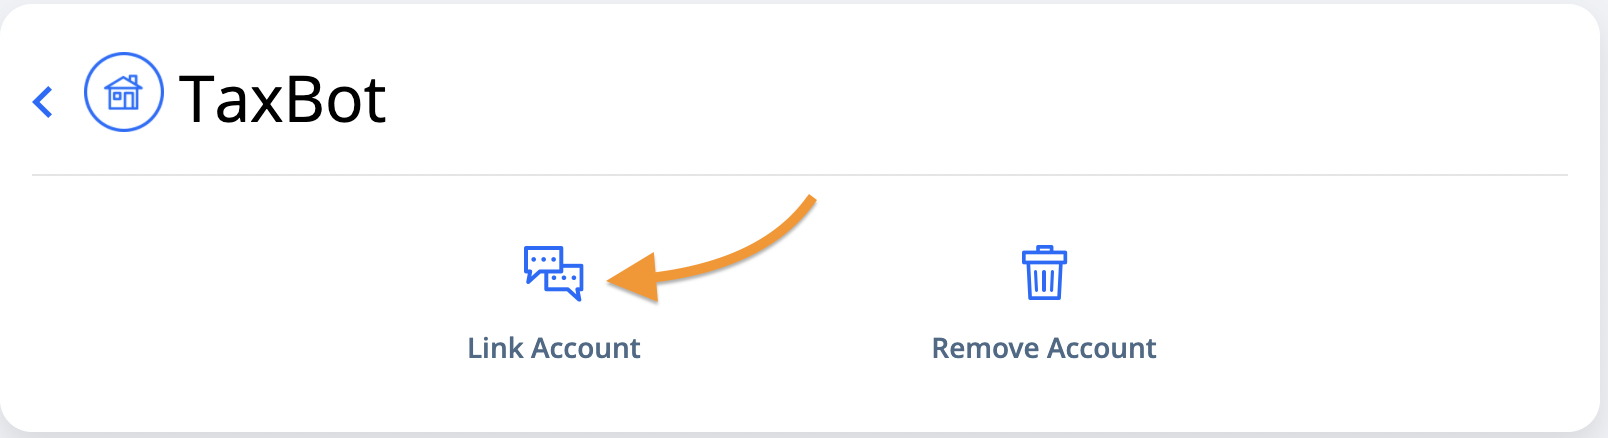 Link account button